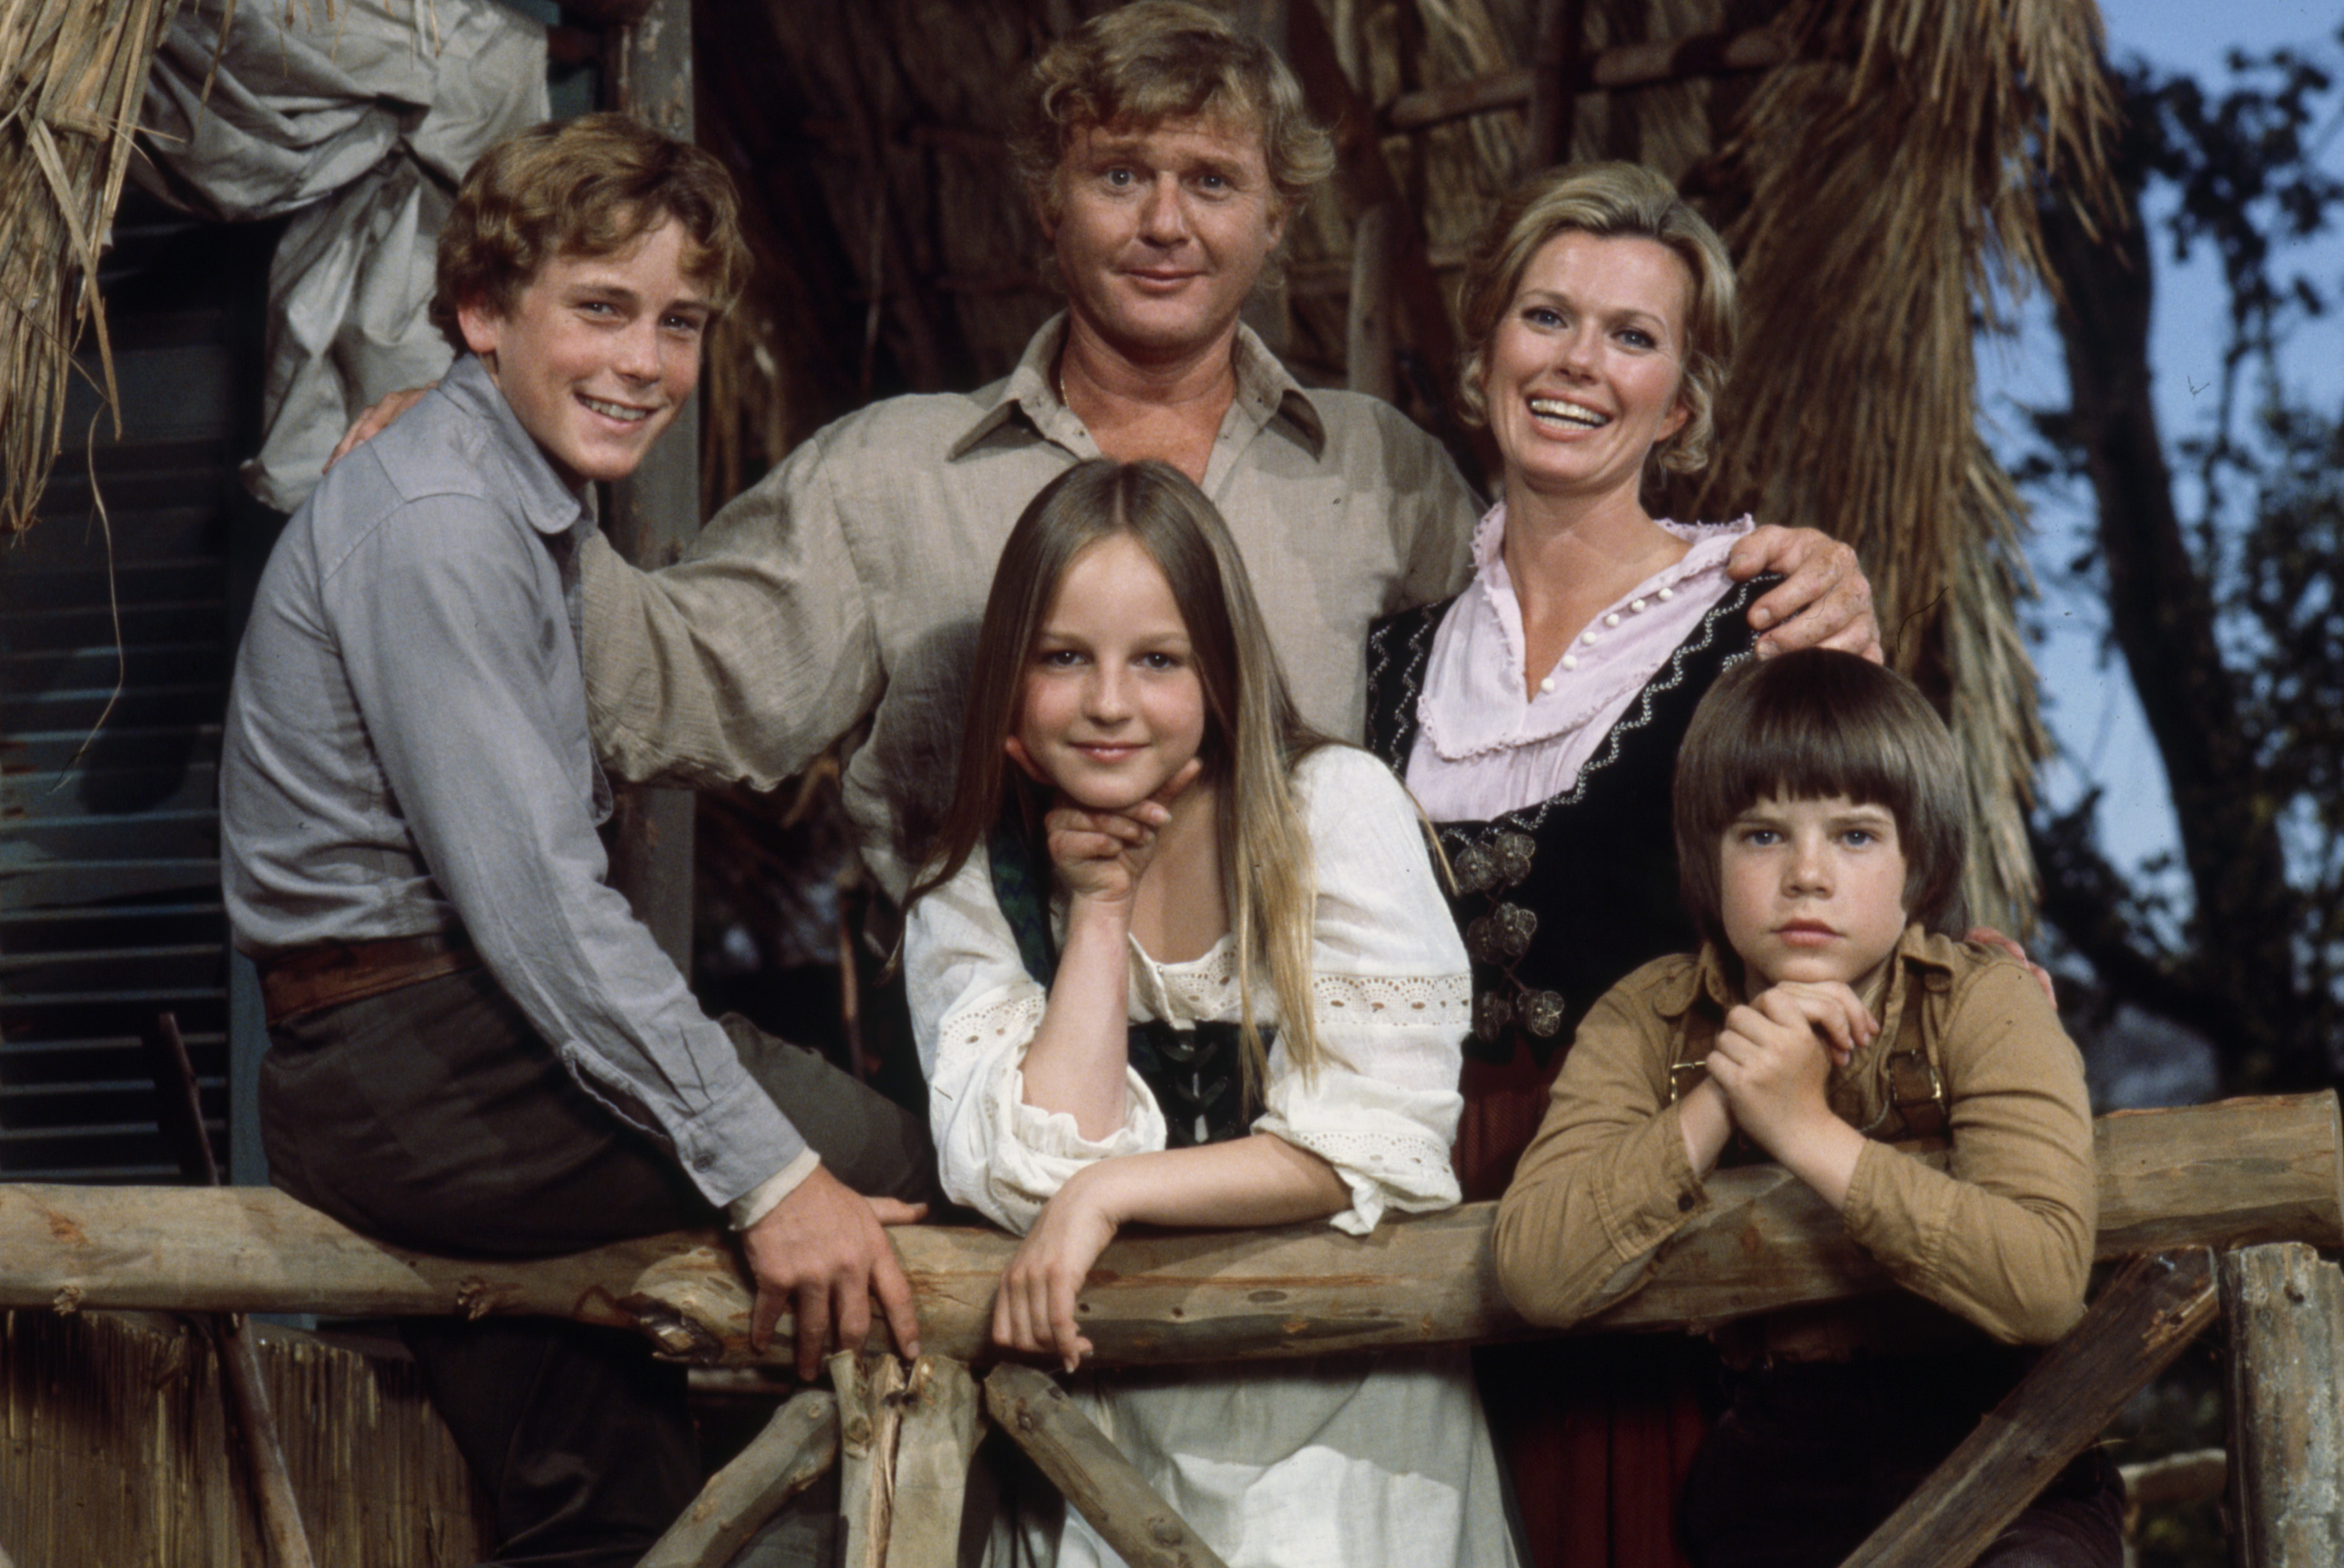 Pat Delany, Martin Milner, Willie Aames, Helen Hunt, Eric Olson promotional photo for the ABC tv series "Swiss Family Robinson" circa 1975. | Source: Getty Images